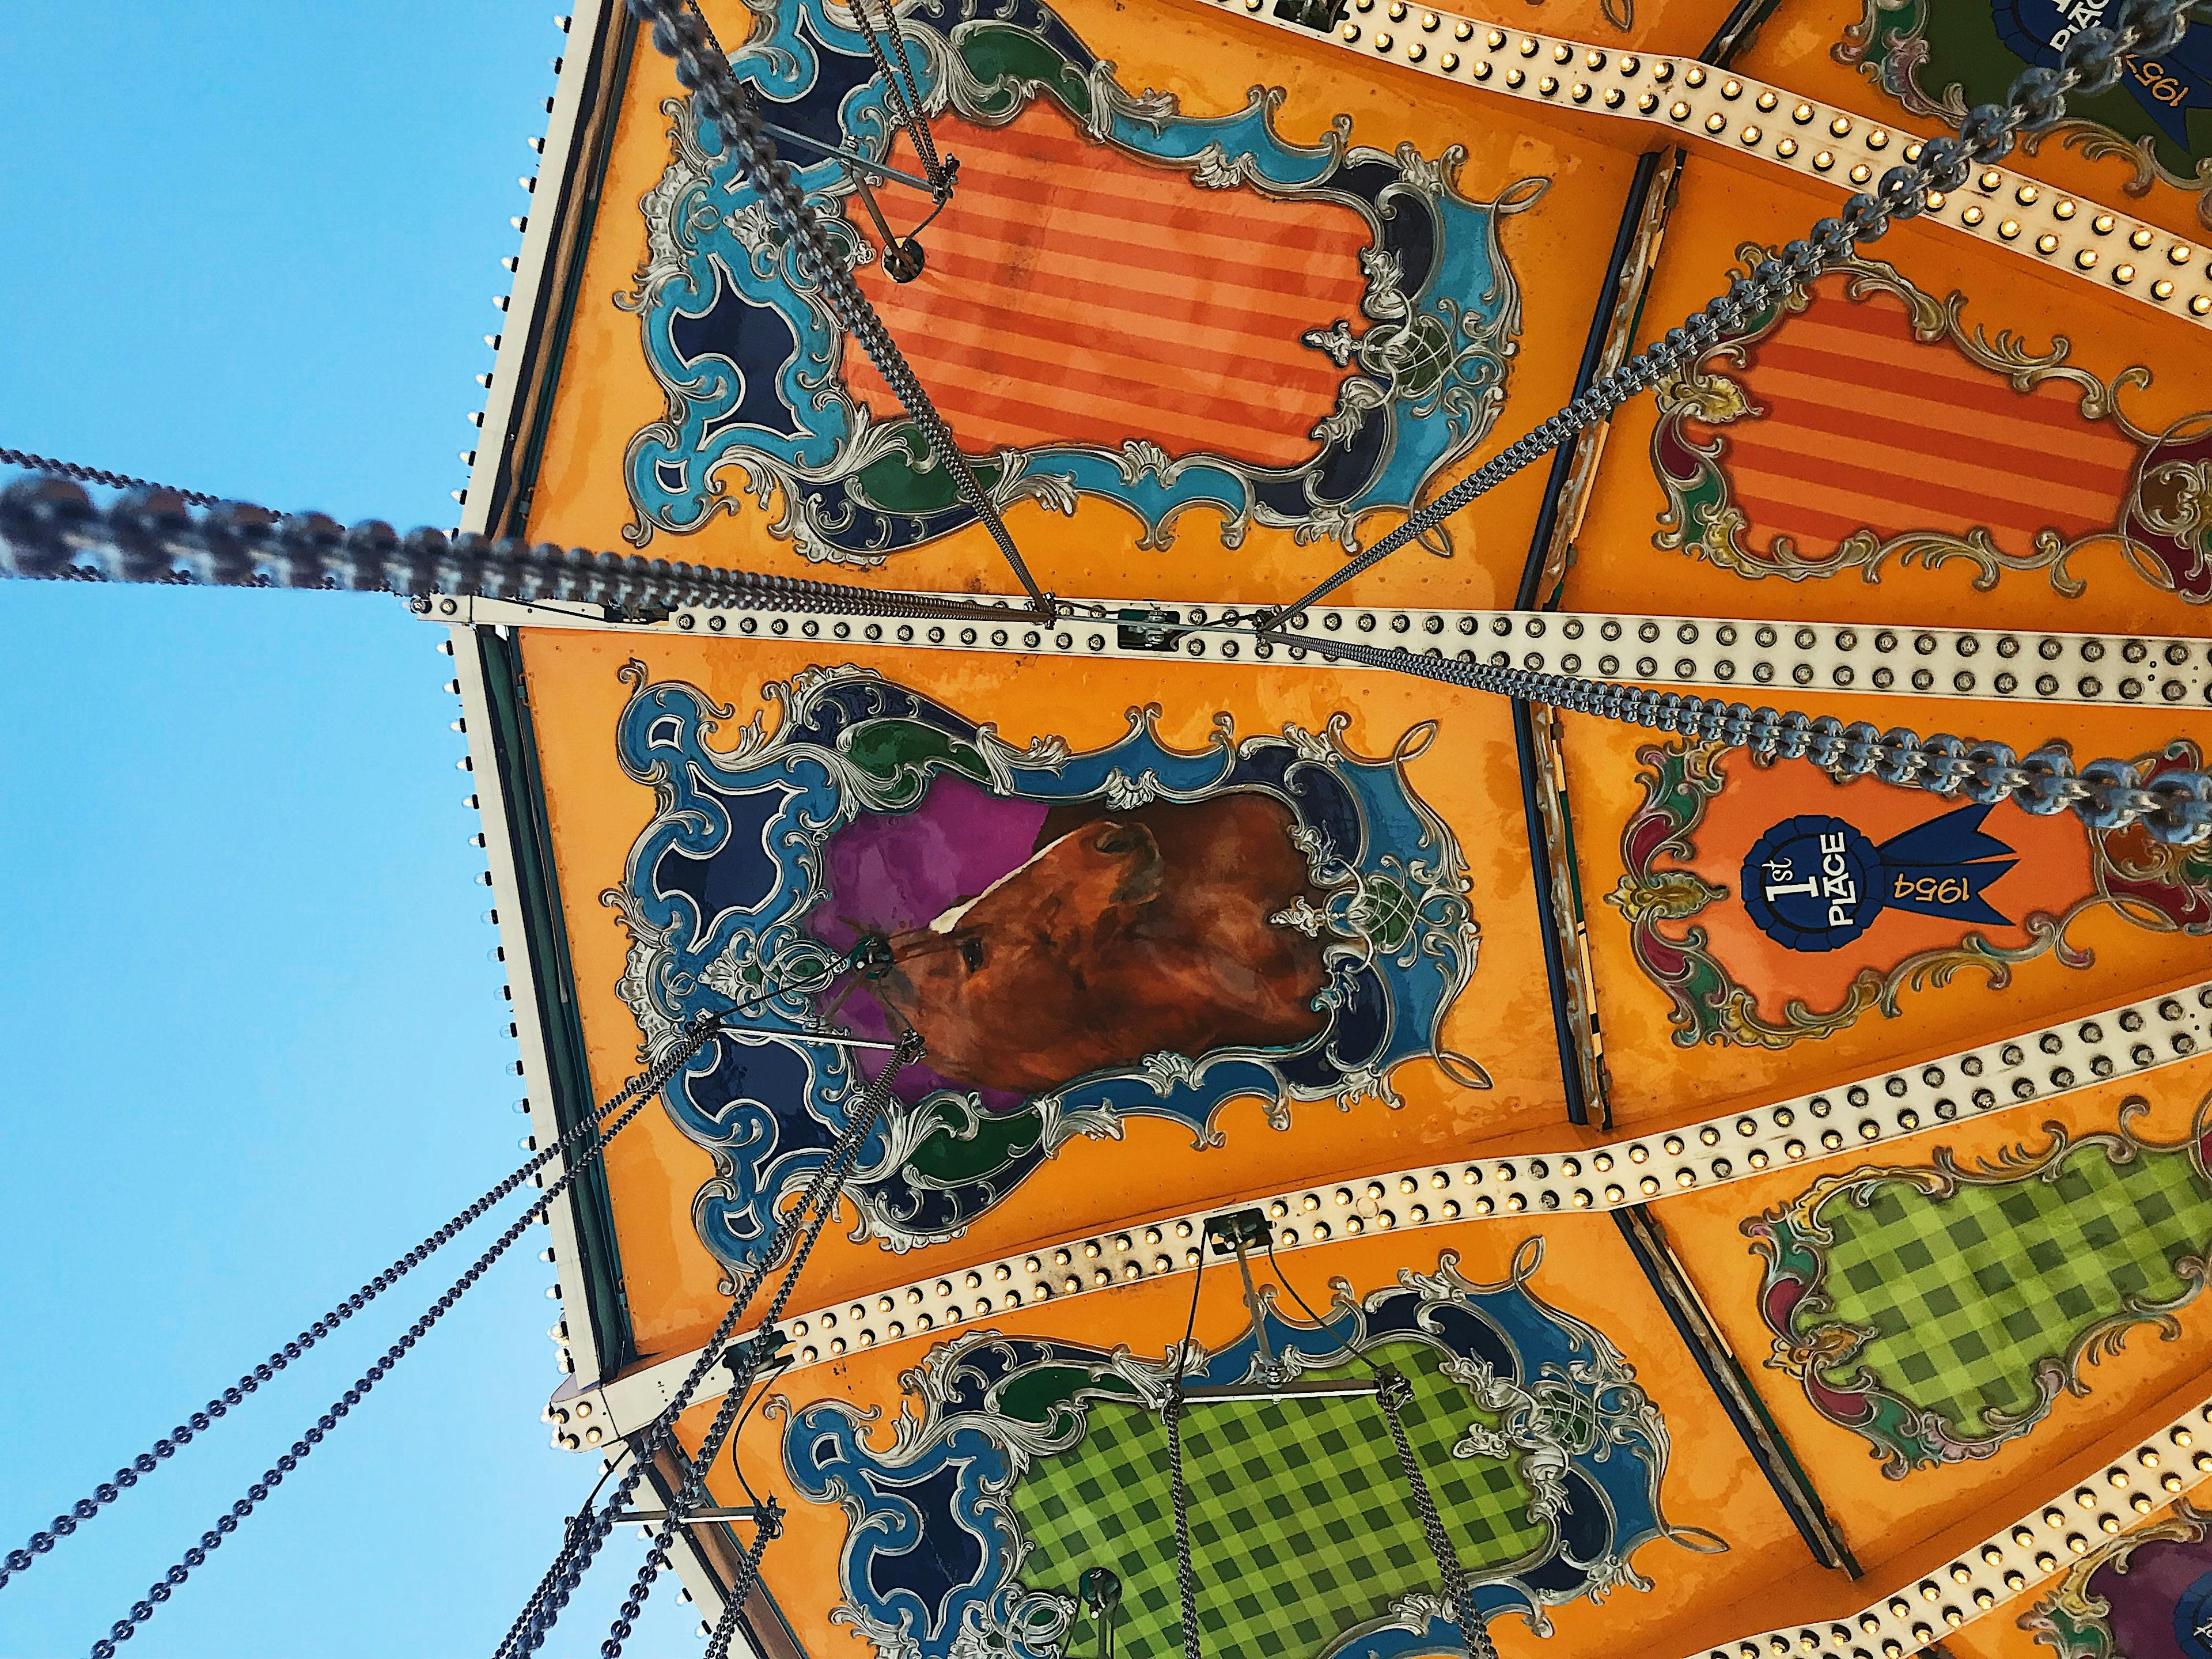 The painted roof of a carousel with the chains that hold the ride together hanging down.